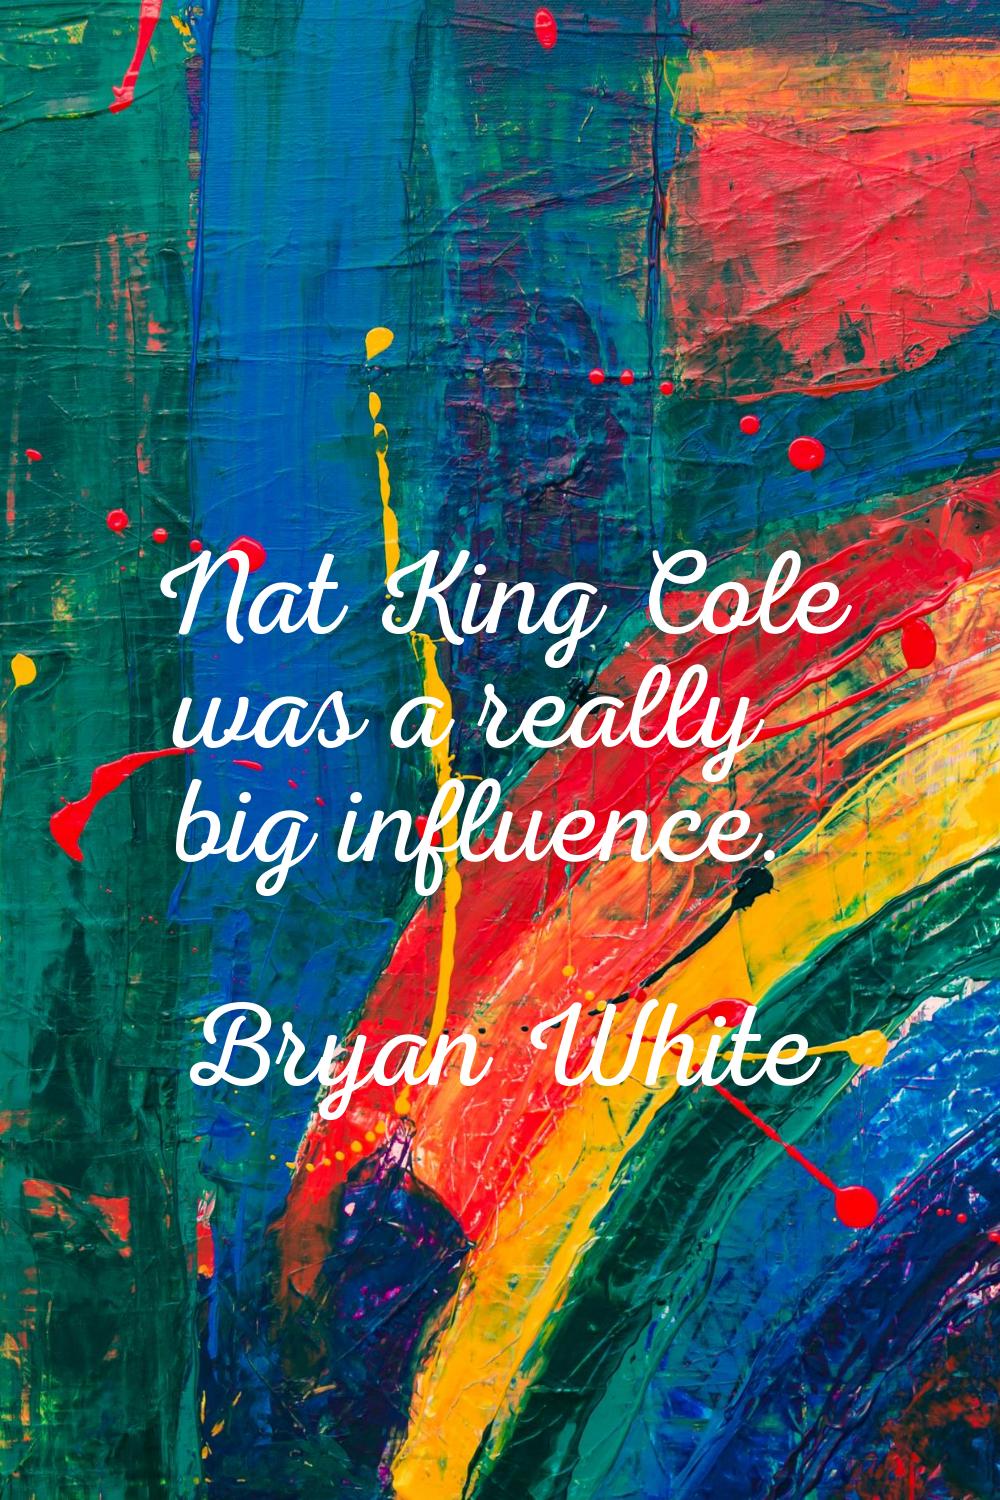 Nat King Cole was a really big influence.